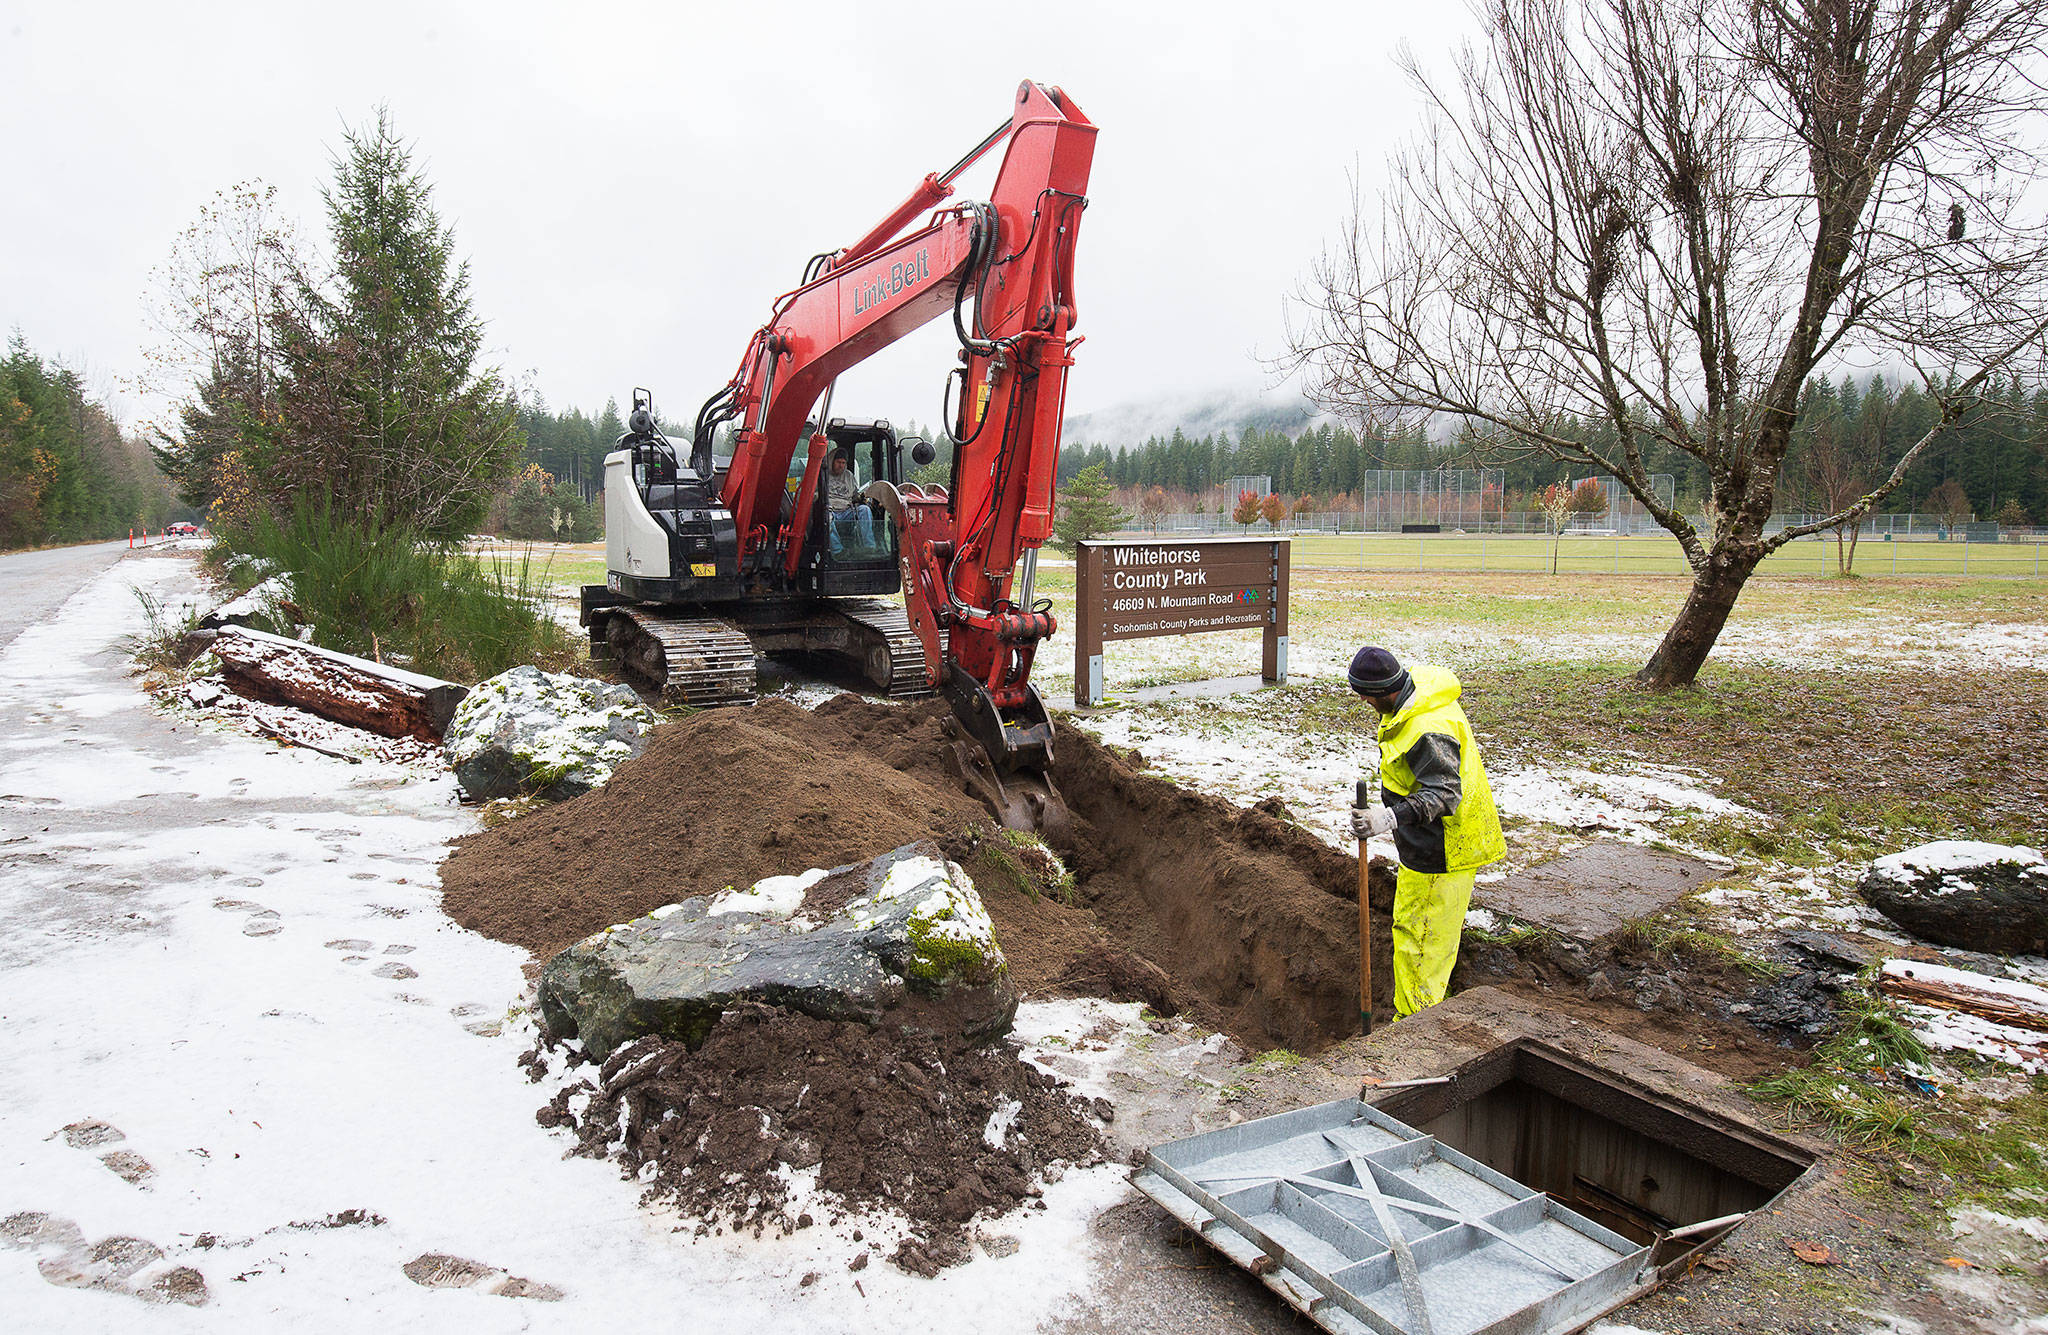 Workers from Konnerup Construction work at Whitehorse Community Park near Darrington, which will have the first equestrian campsites in Snohomish County. (Andy Bronson / The Herald)